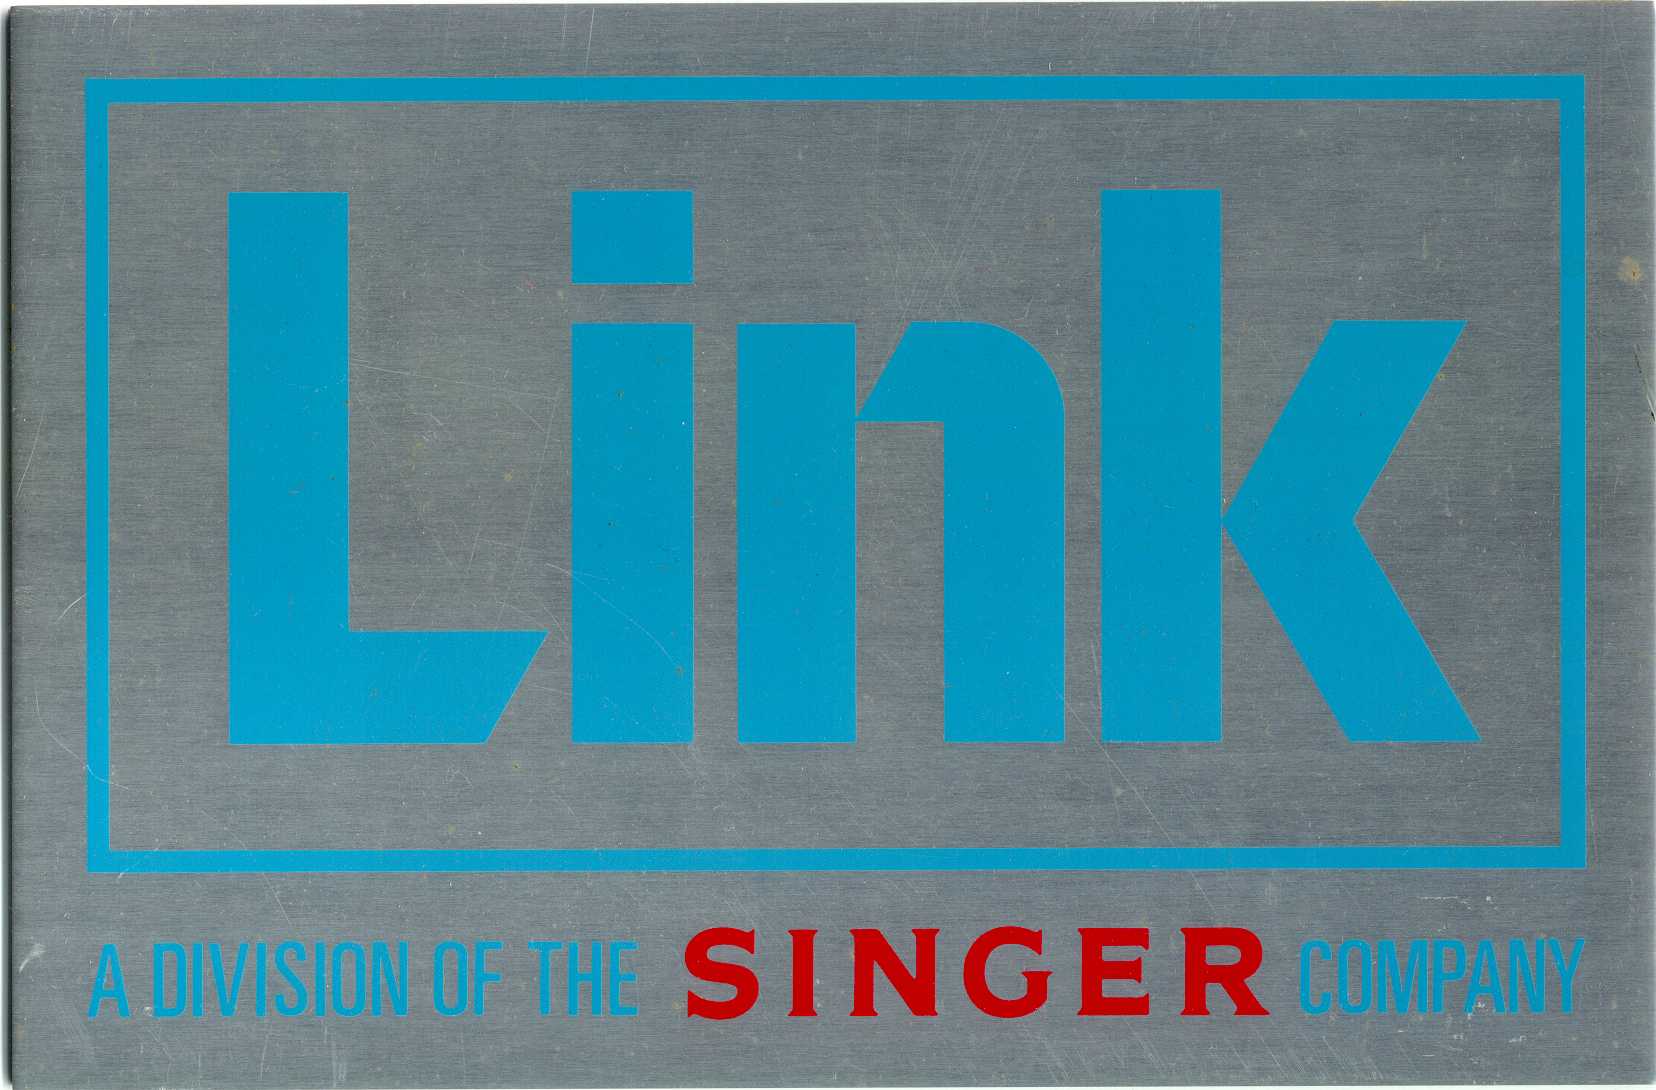 Link - A Division Of The Singer Company